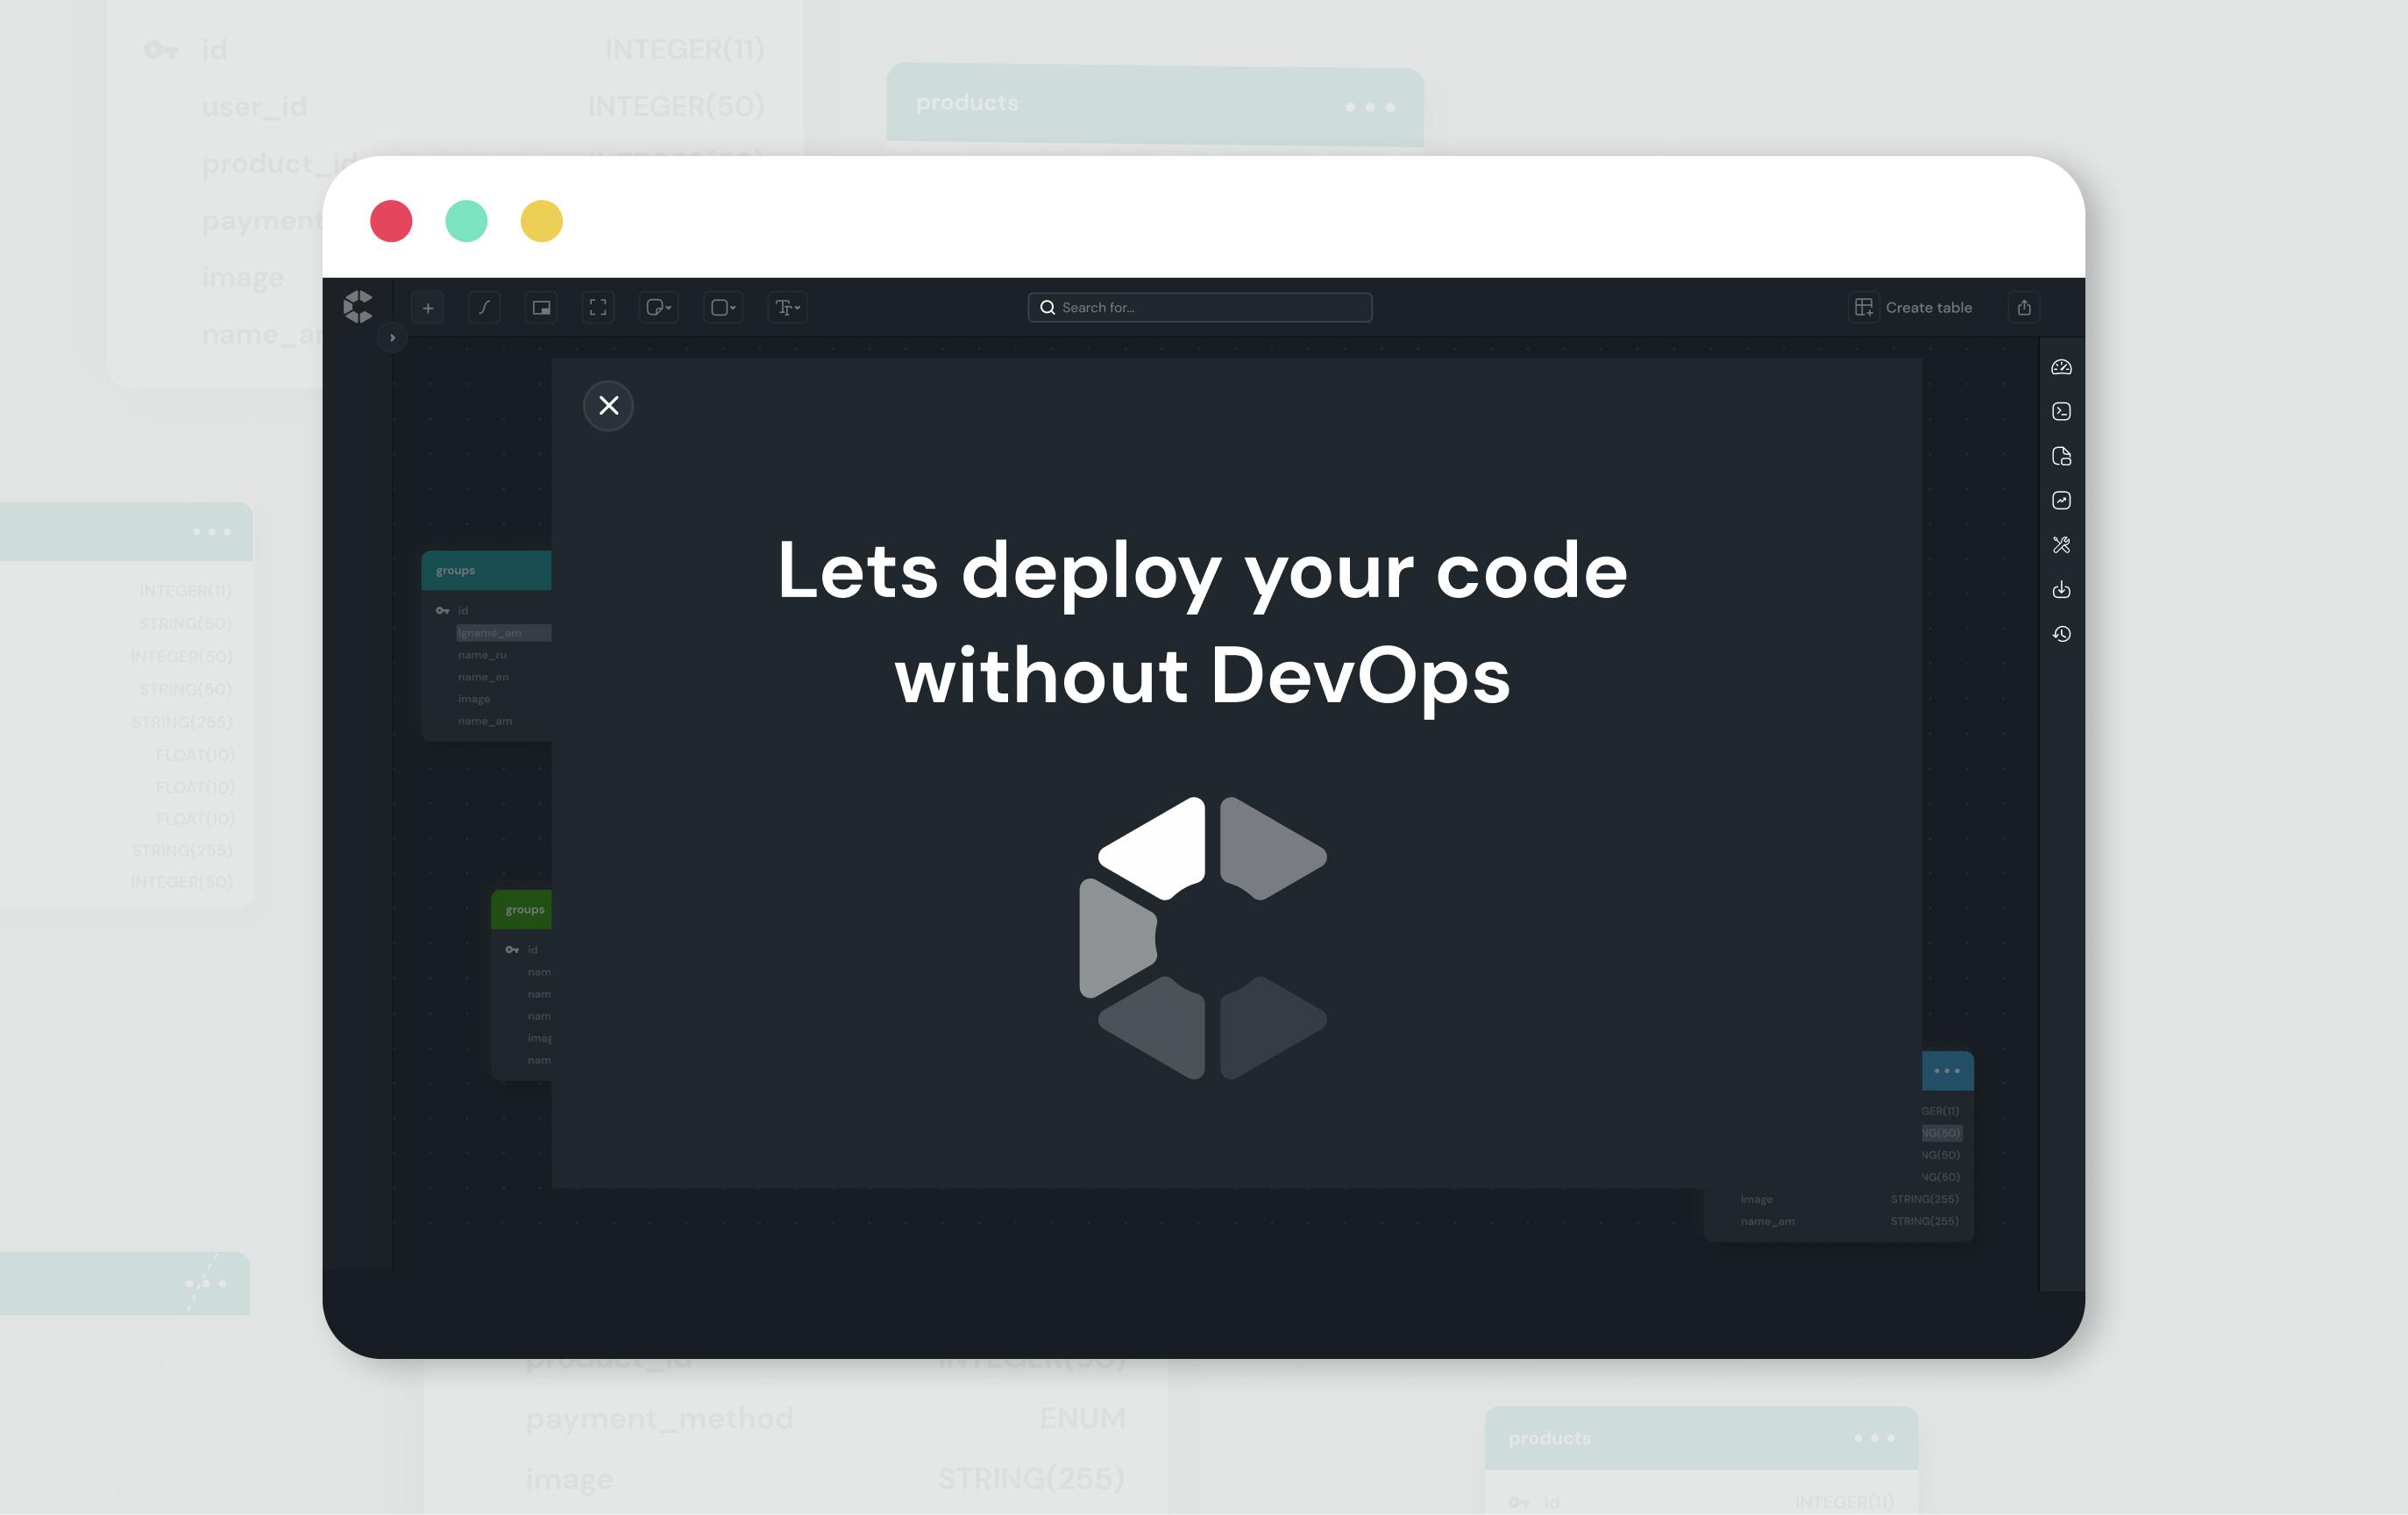 Lets deploy your code without DevOps